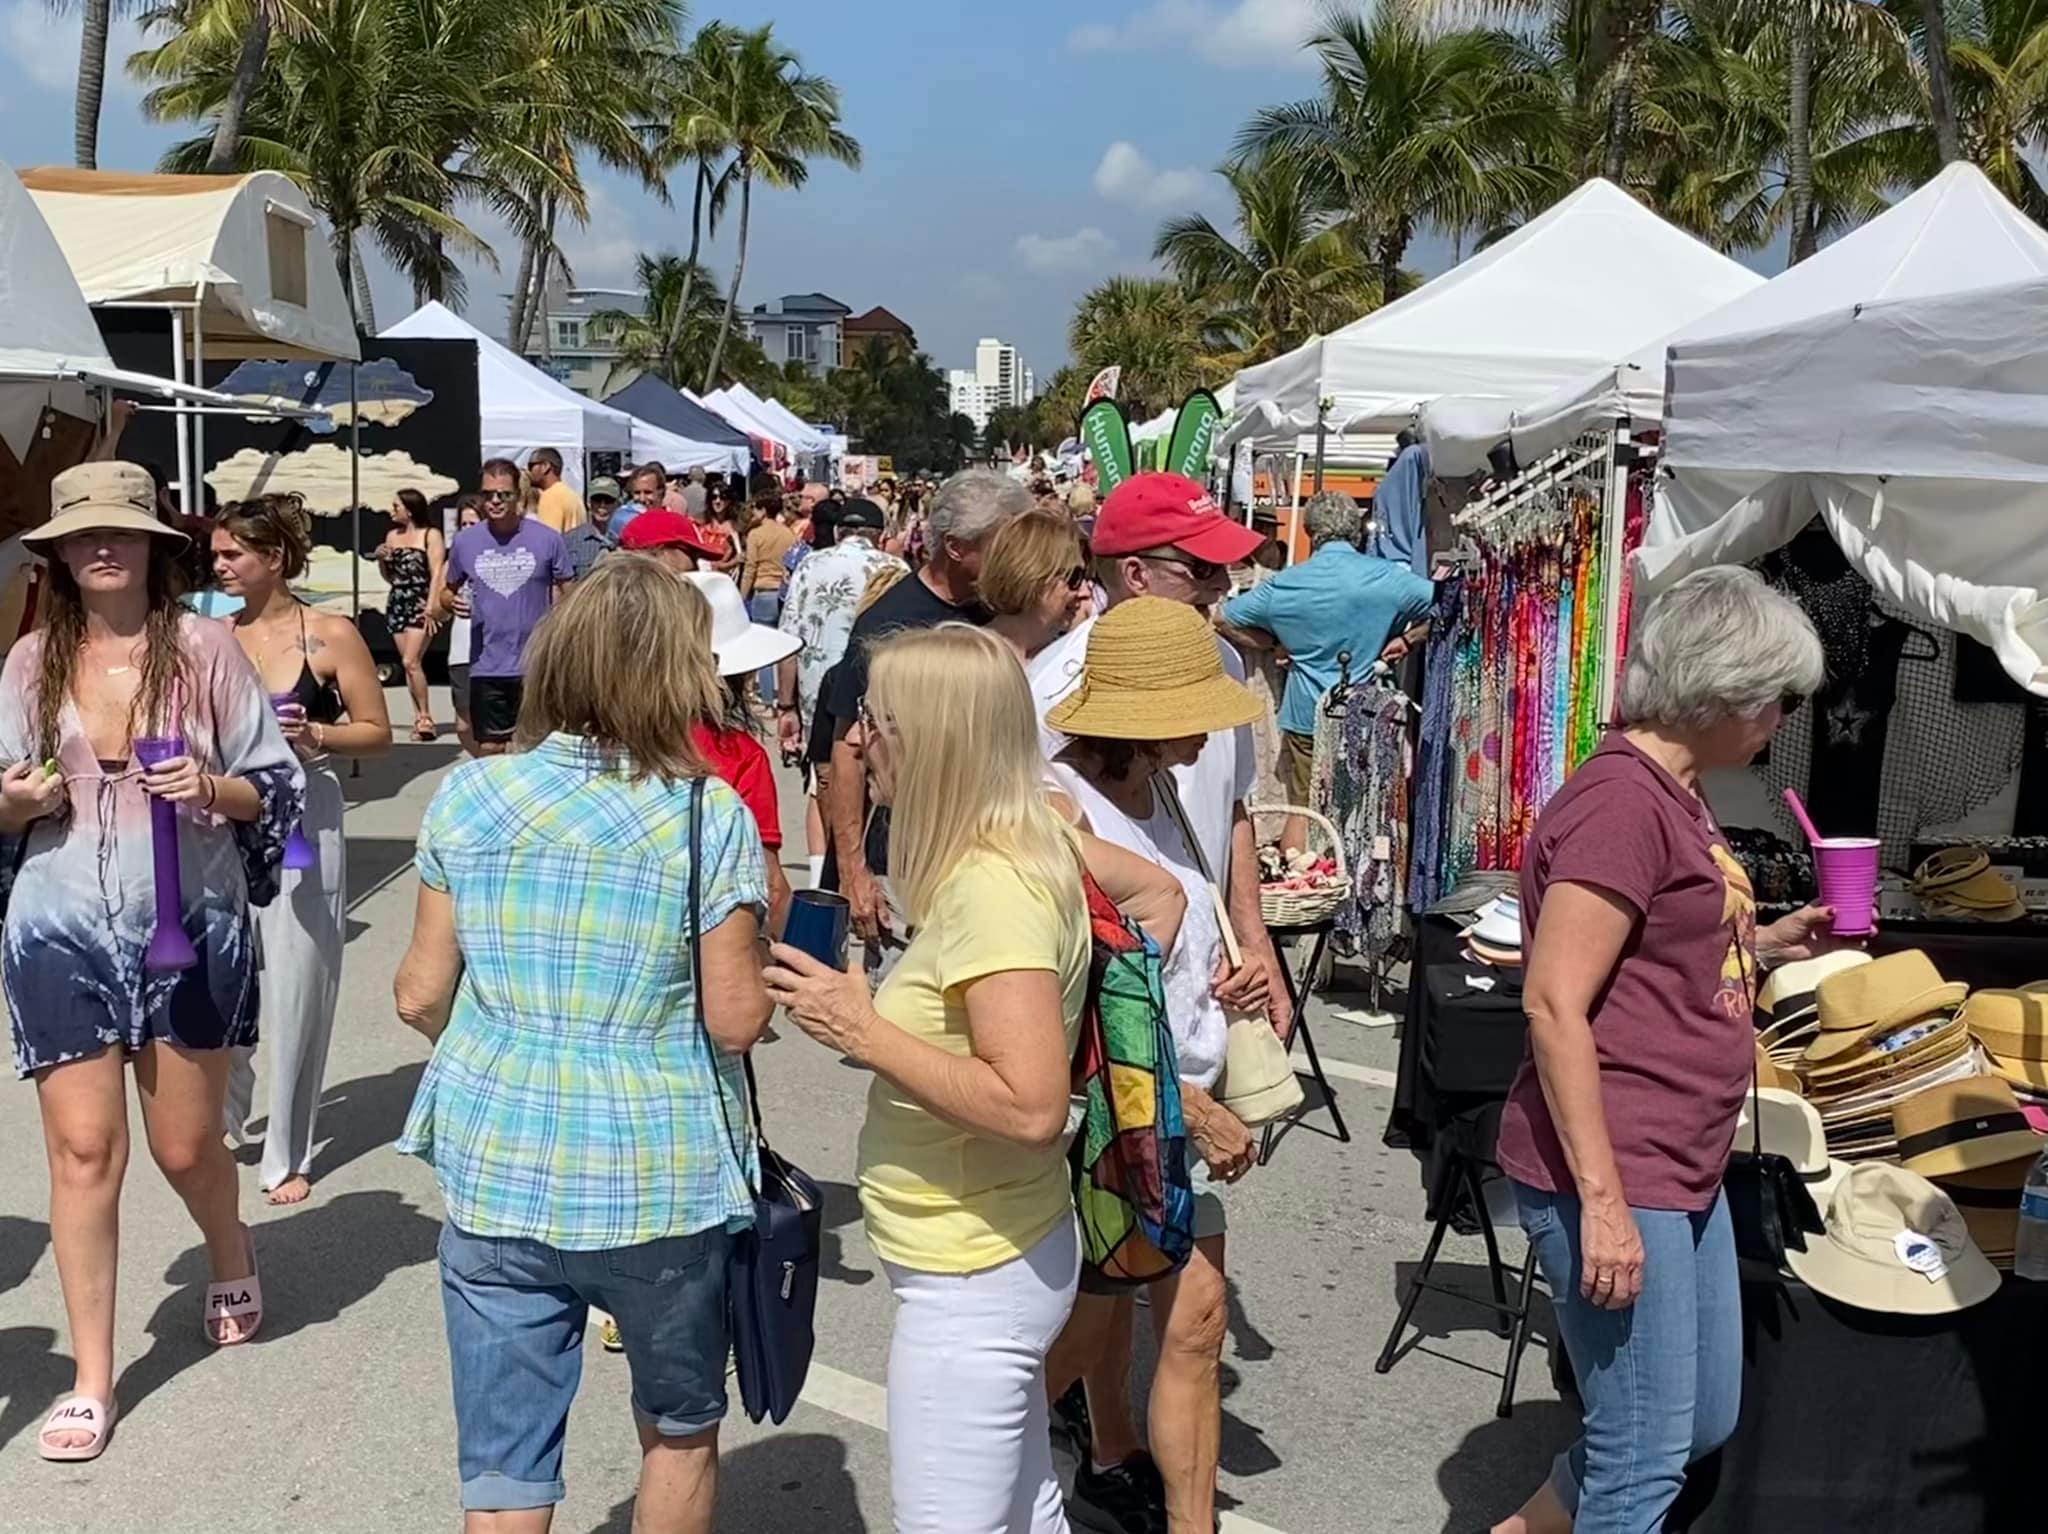 Free Deerfield Festival of the Arts & Pioneer Days South Florida on